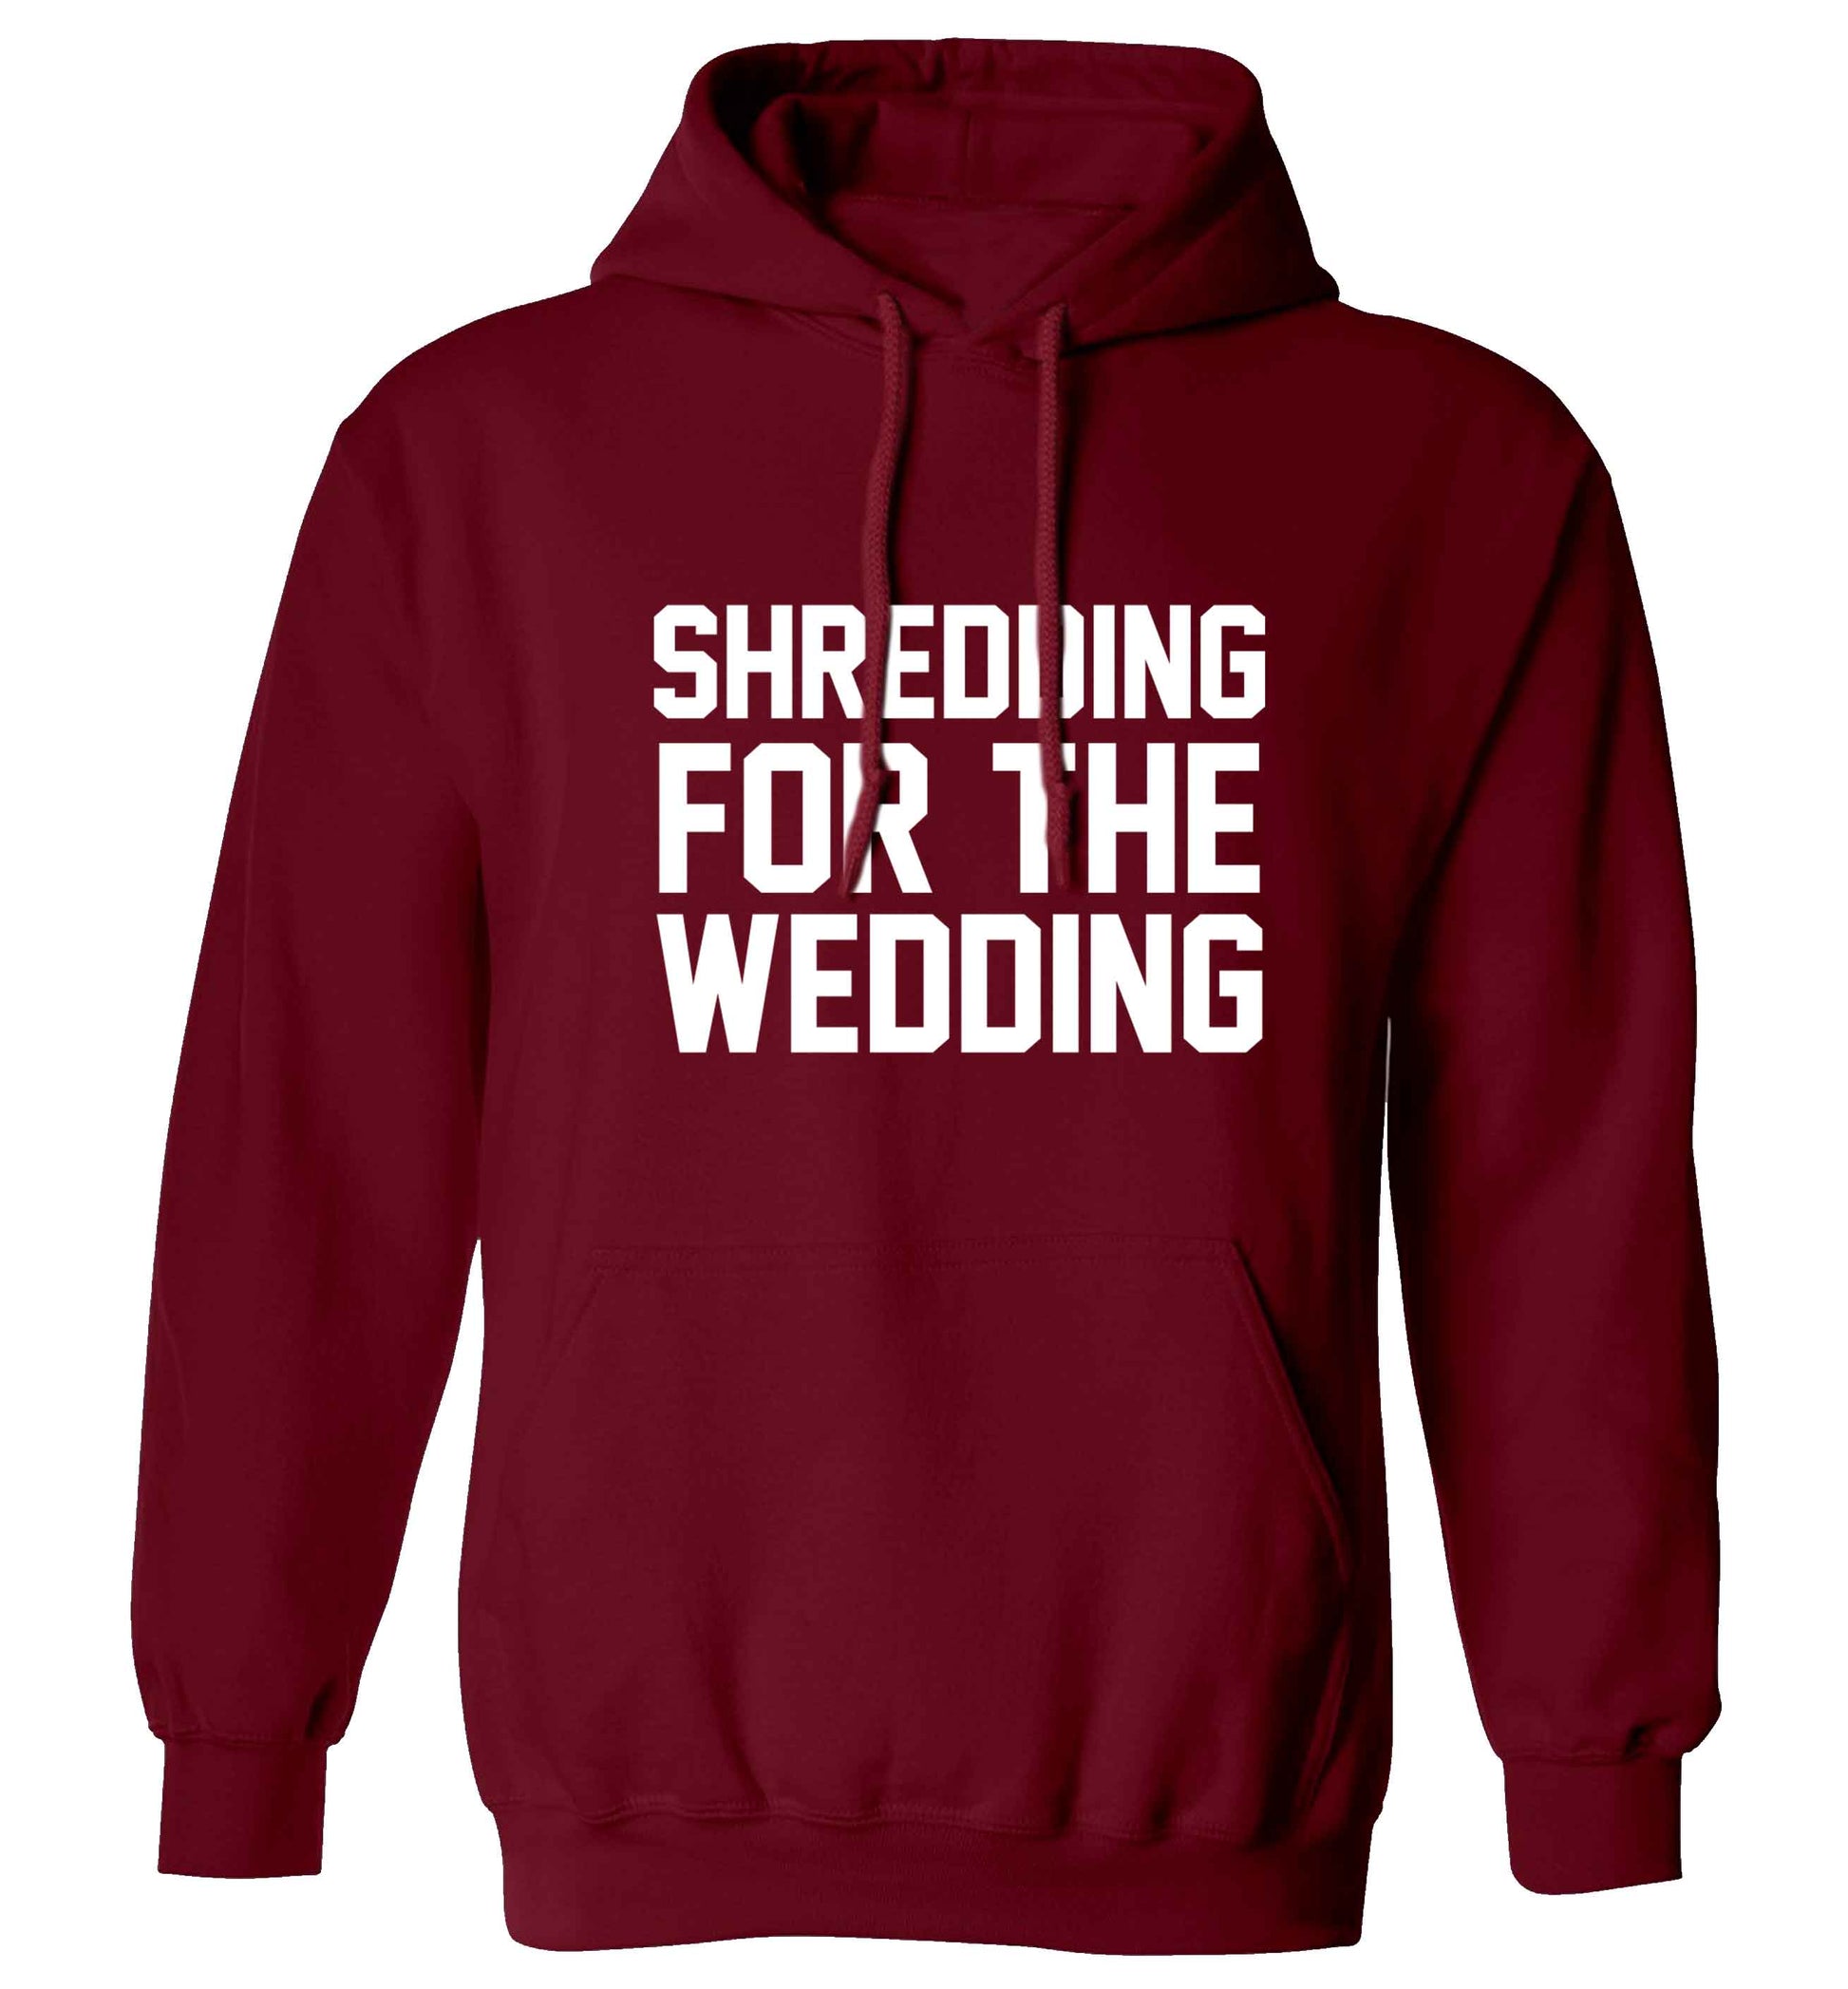 Get motivated and get fit for your big day! Our workout quotes and designs will get you ready to sweat! Perfect for any bride, groom or bridesmaid to be!  adults unisex maroon hoodie 2XL